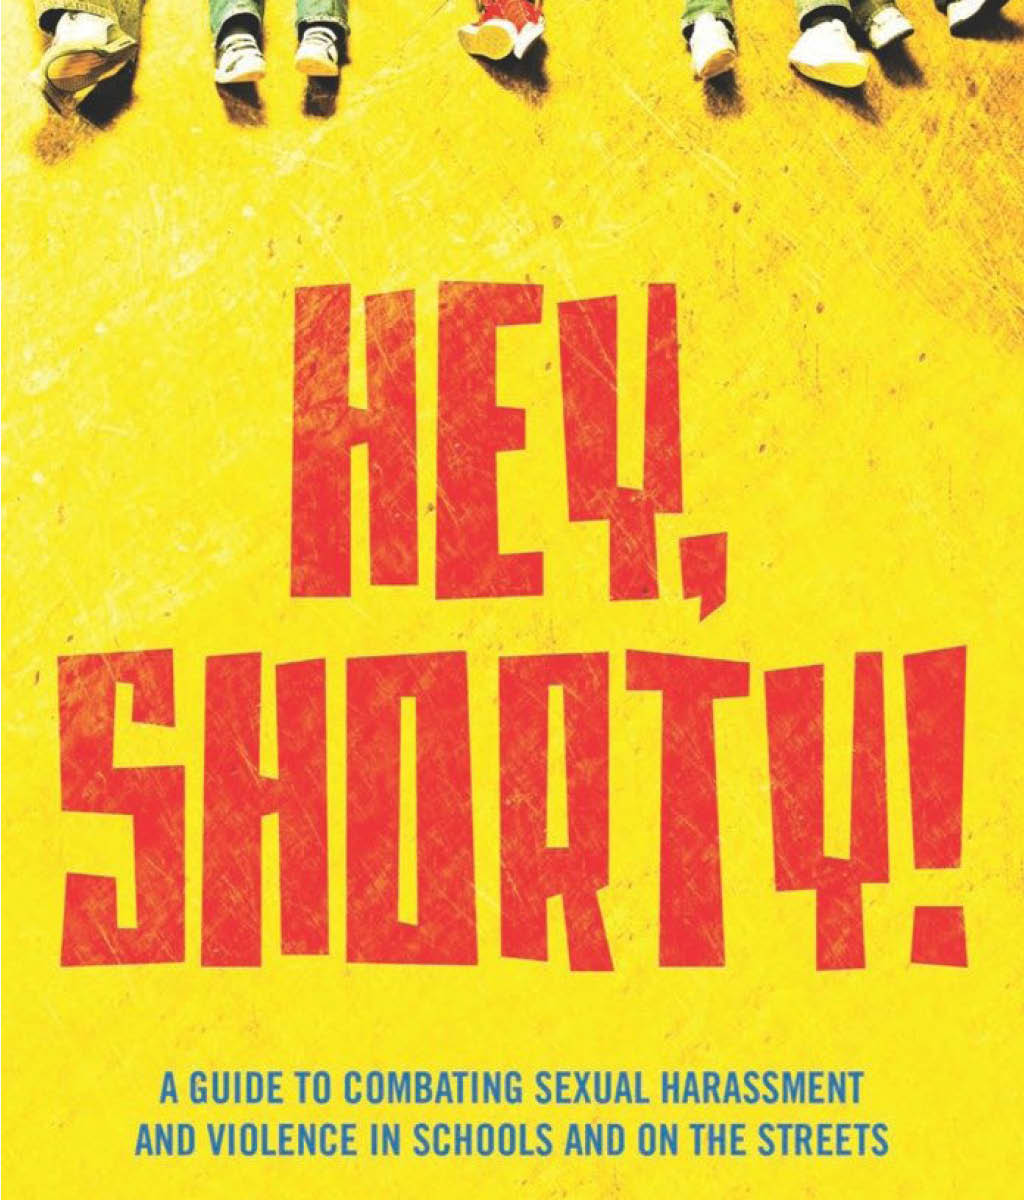 Hey, Shorty! : A Guide to Combating Sexual Harassment and Violence in Schools and on the Streets by Joanne Smith, Meghan Huppuch &amp; Mandy Van Deven
